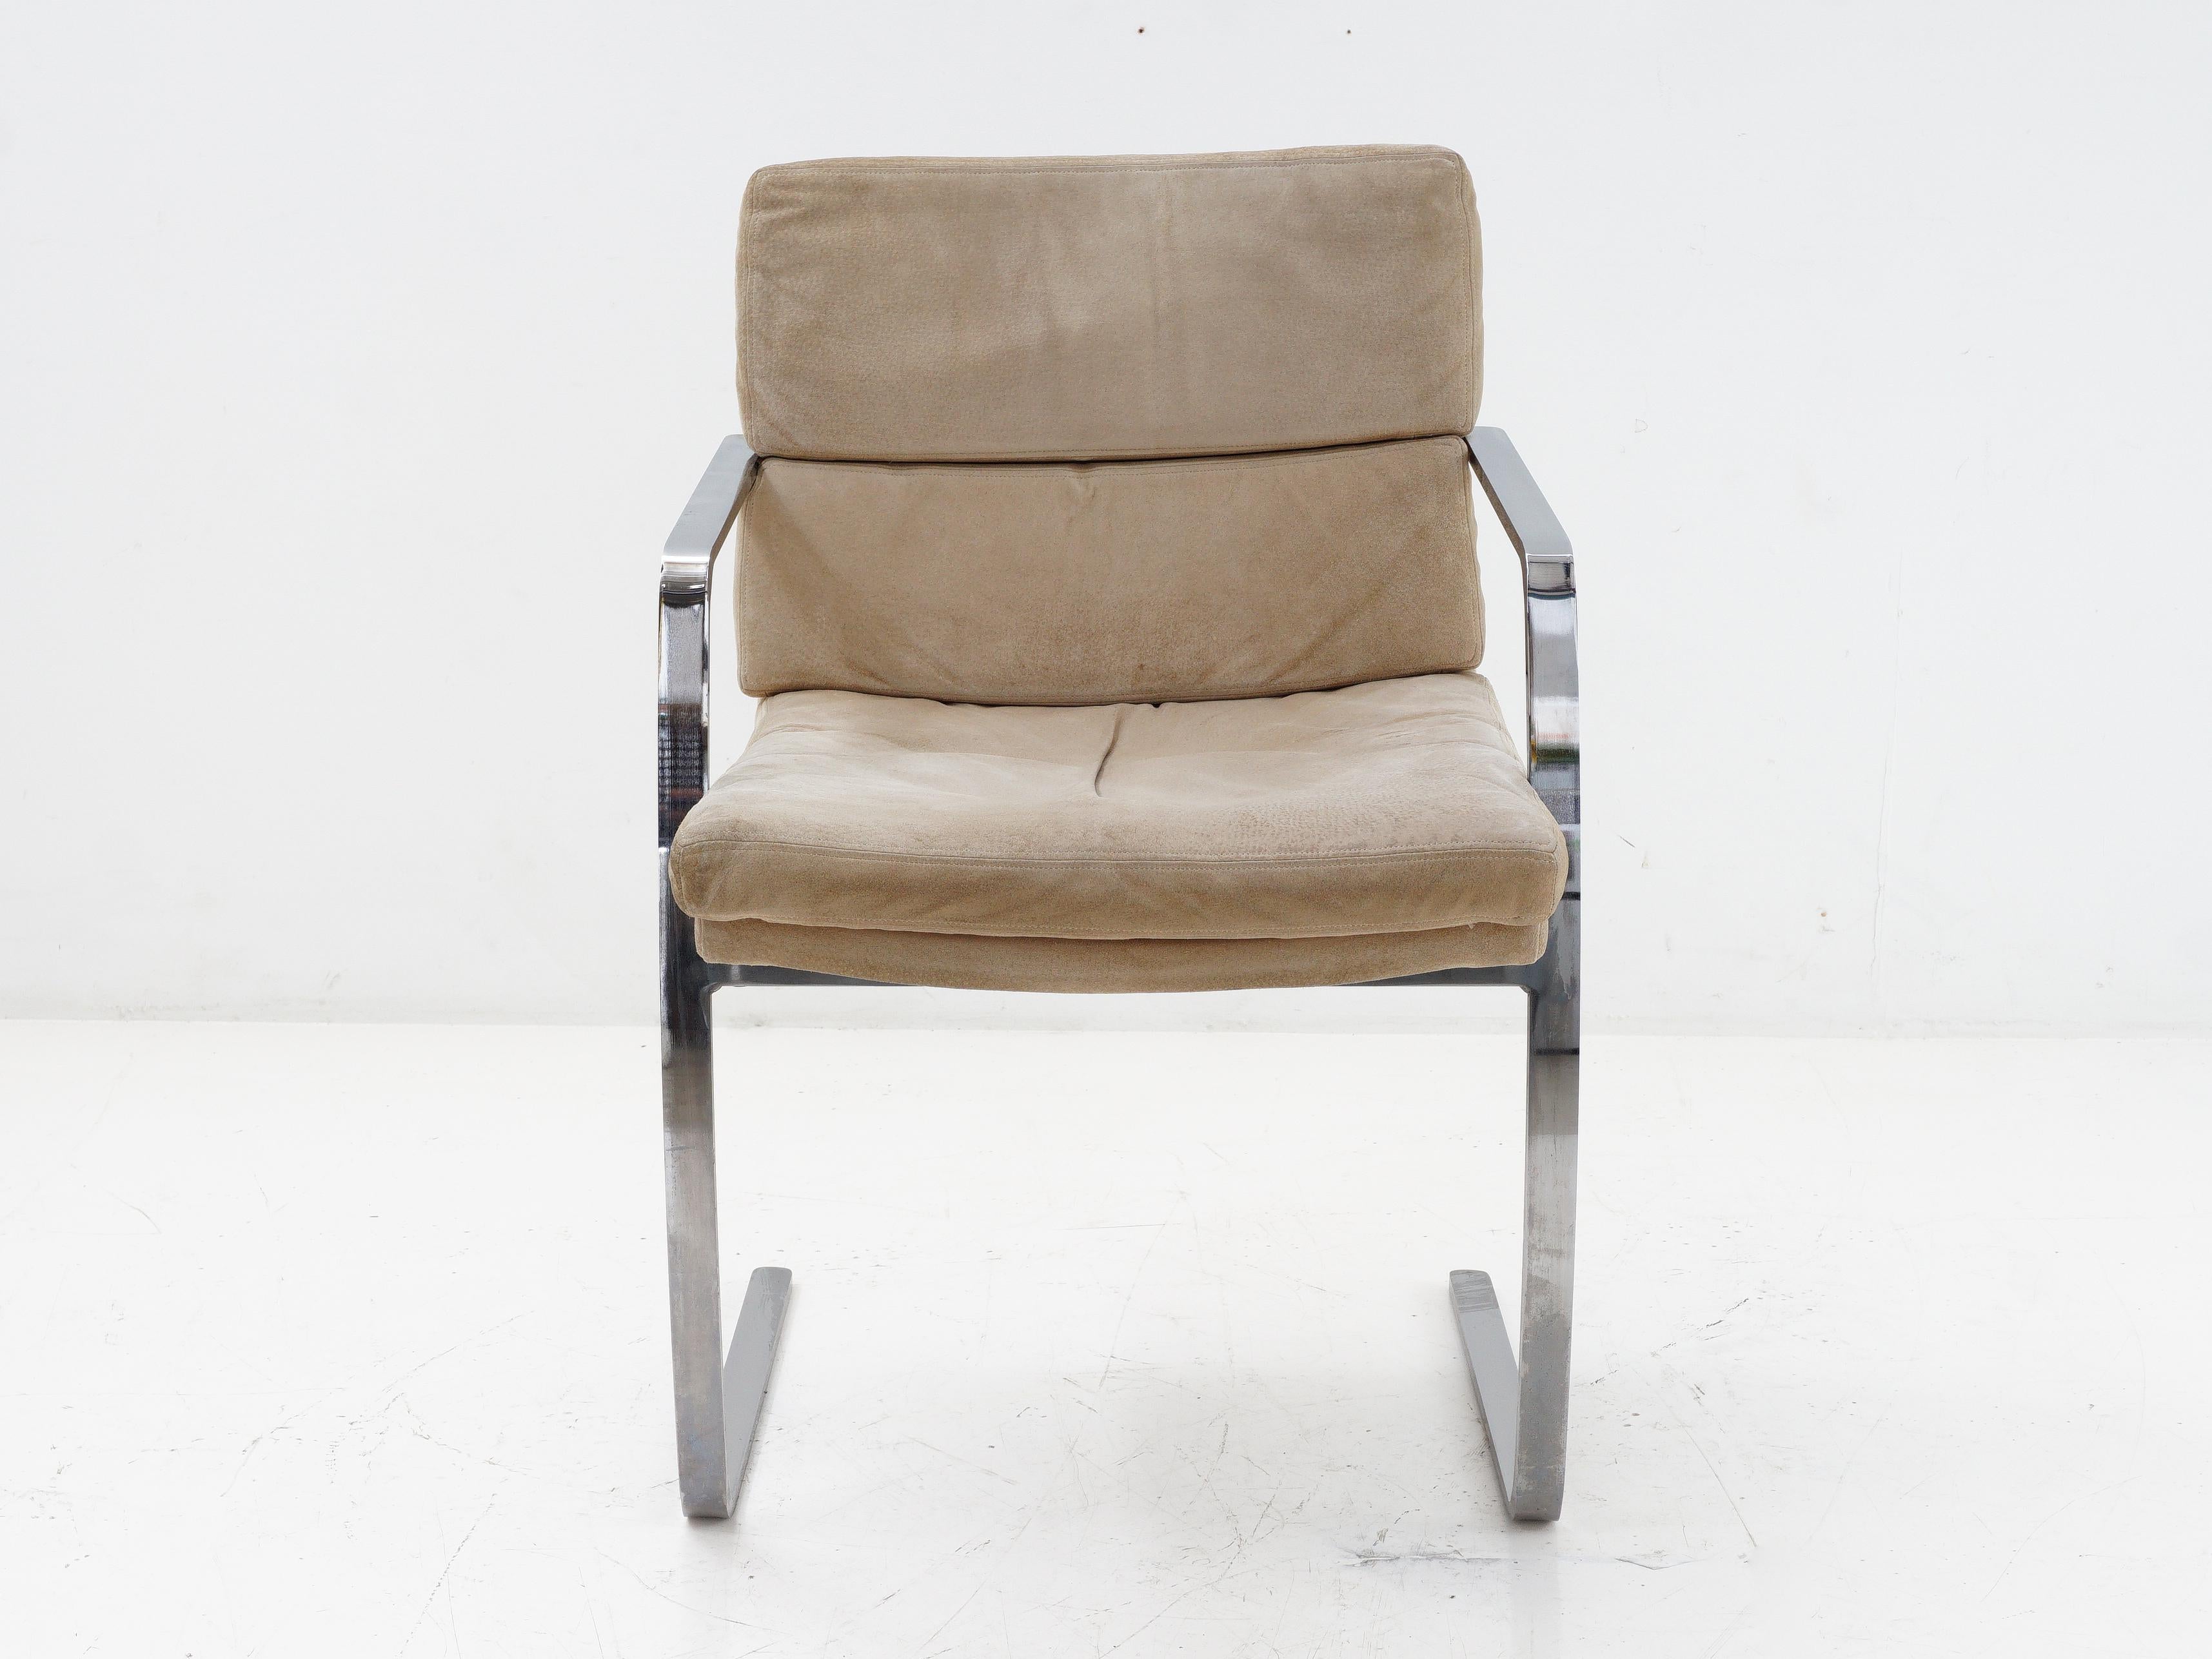 Indulge in a slice of design history with this sleek and snug BRNO style lounge chair, inspired by the Bauhaus era. This seat is a timeless staple that strikes a masterful balance between the natural and manmade; it invites you back to an era where